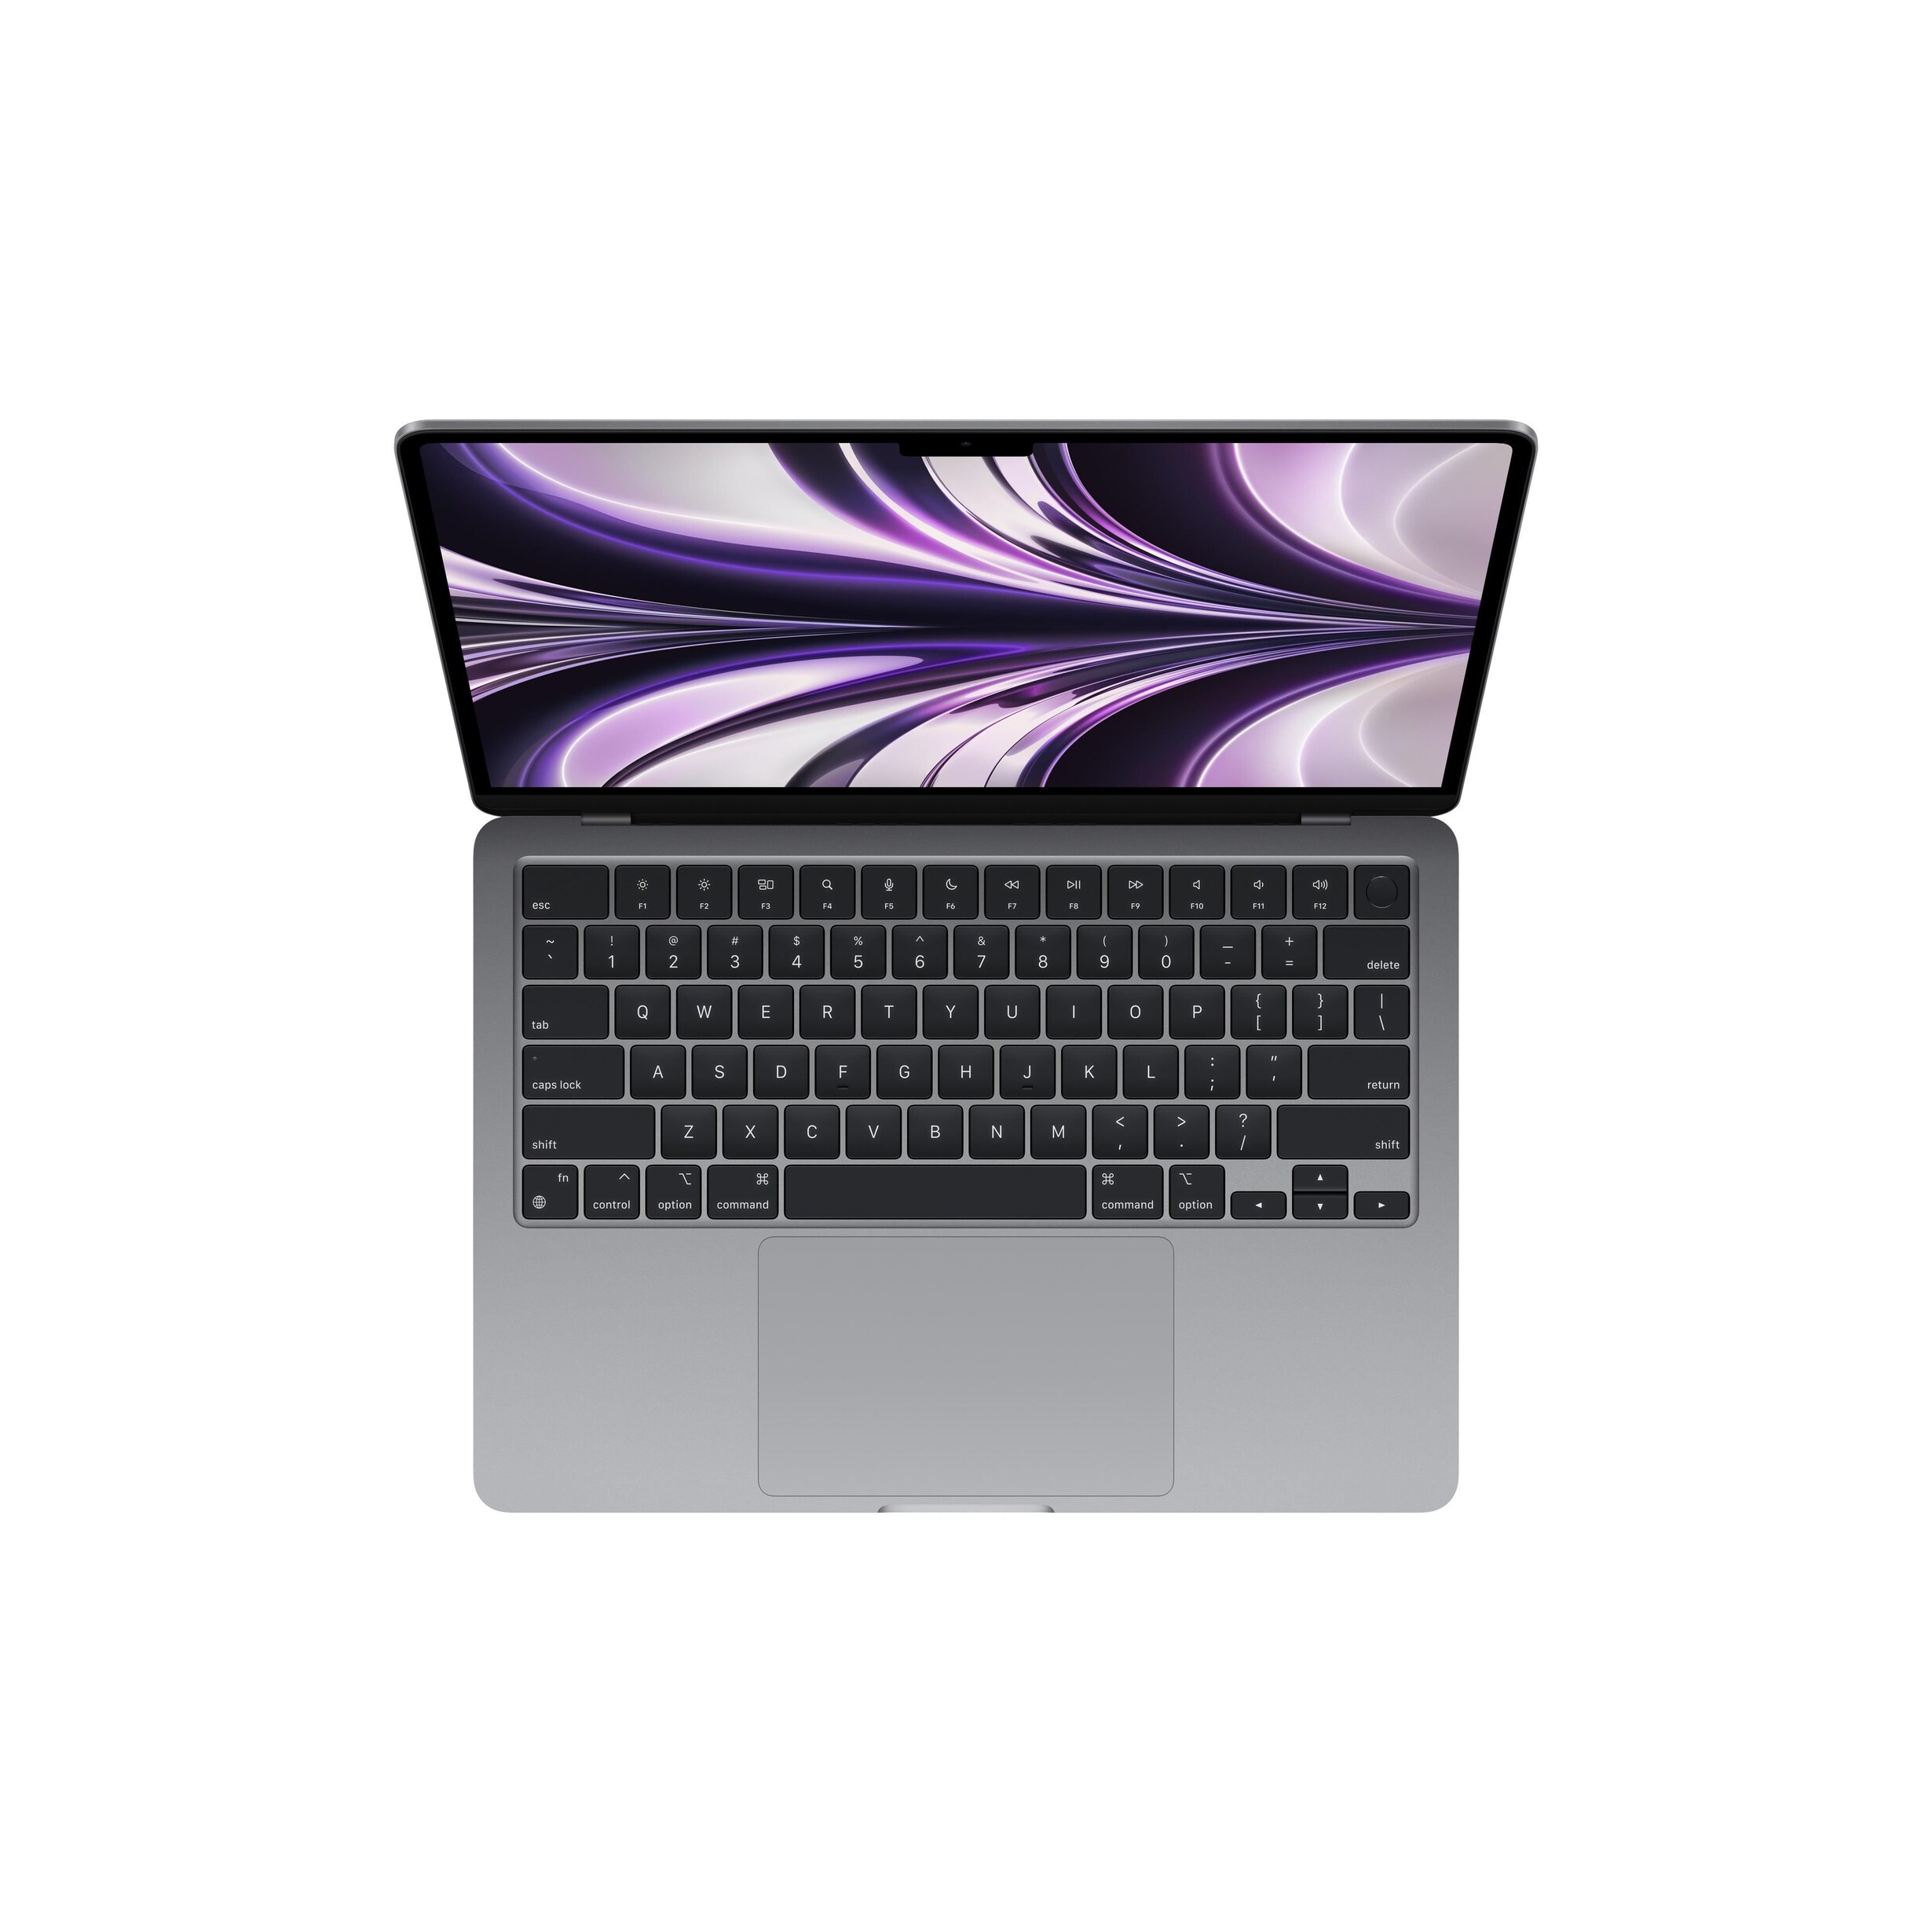 Apple MacBook Air 13.6 Laptop - Apple M2 Chip - 8GB Memory - 256GB SSD  (Latest Model) in Space Gray | Shop NFM